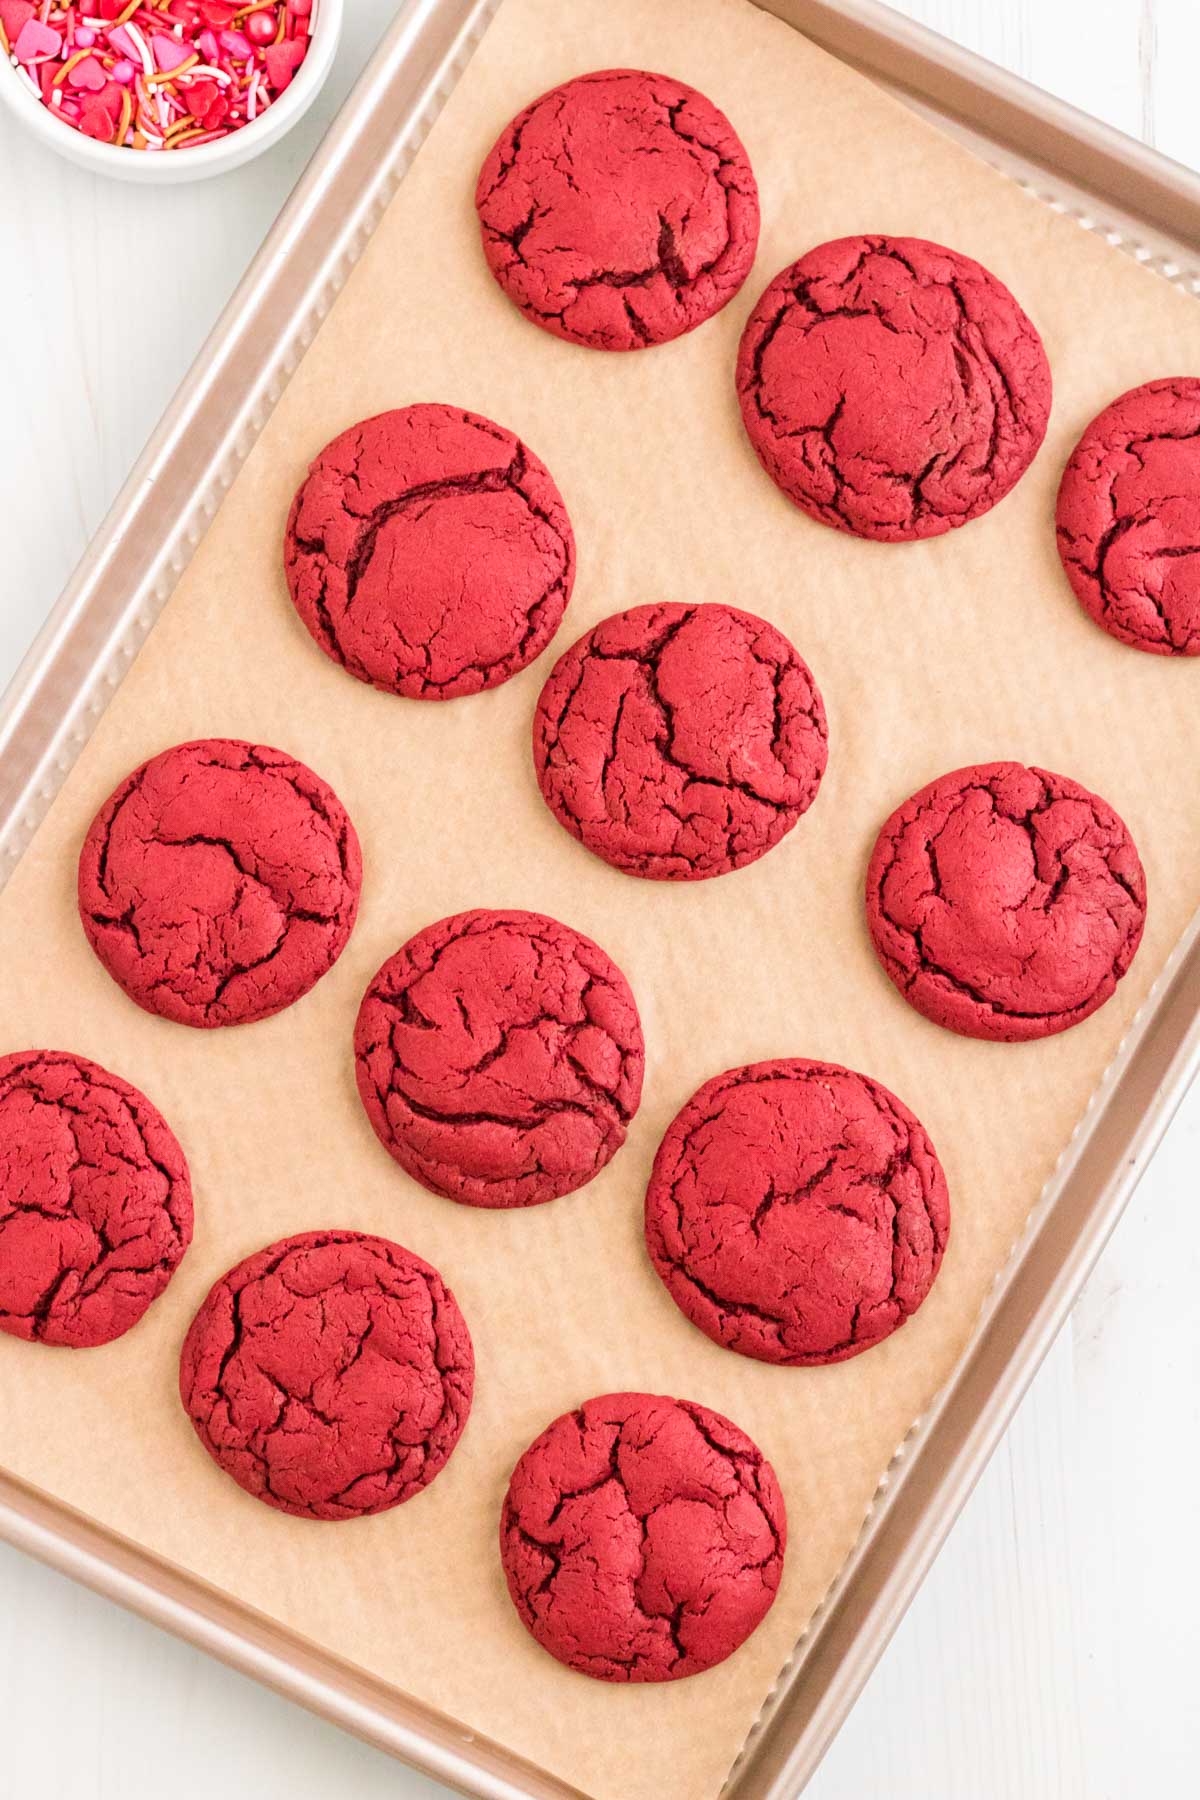 Baked red velvet cookies on a parchment lined baking sheet.